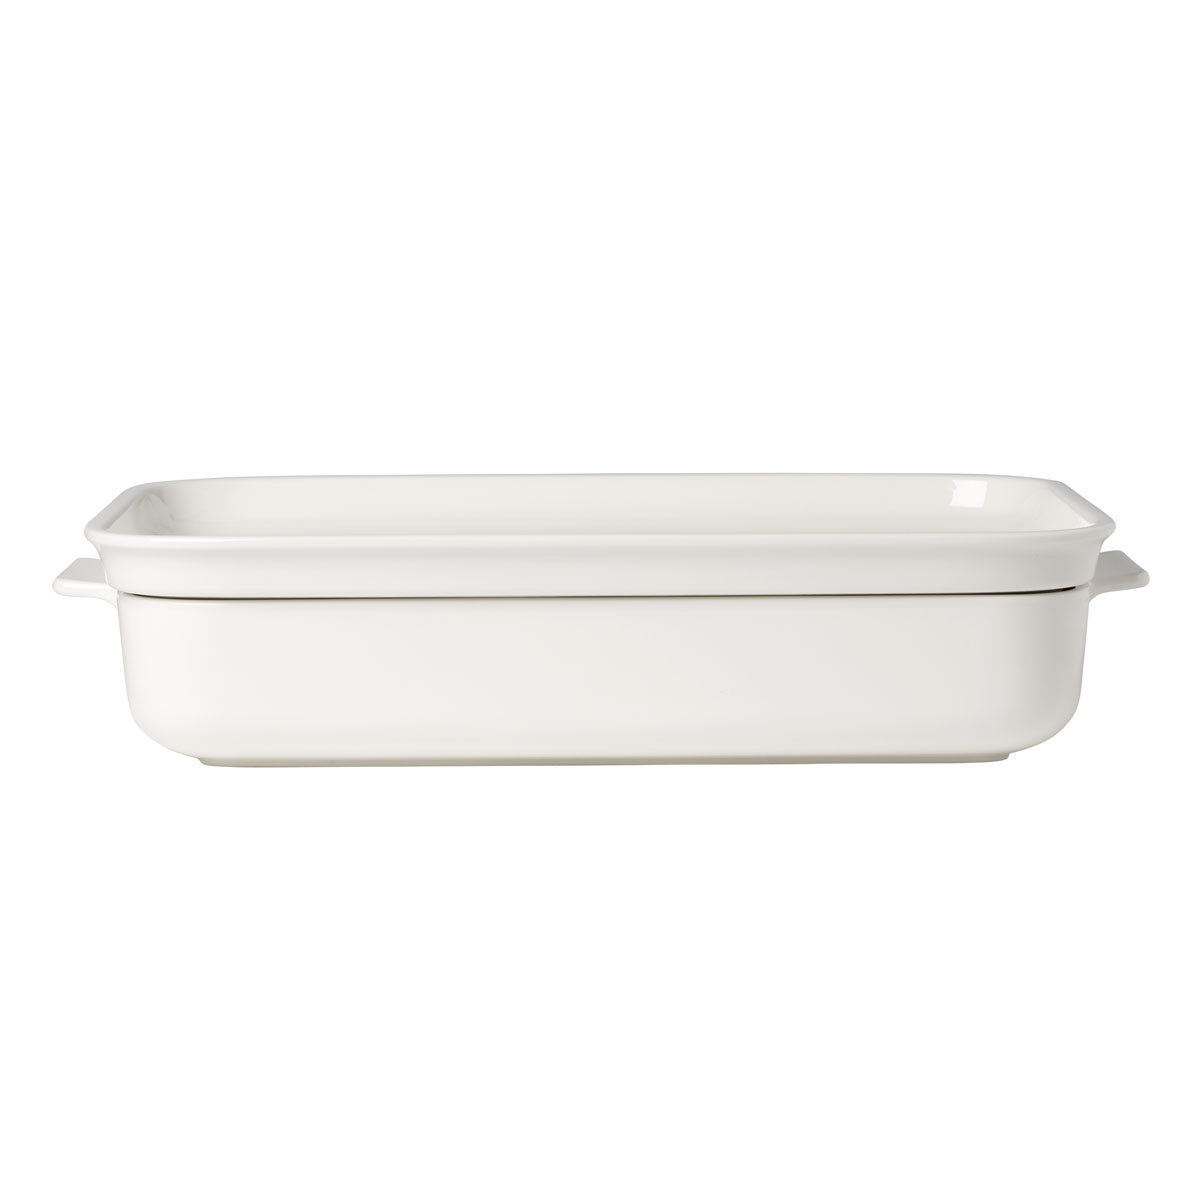 Villeroy and Boch Clever Cooking Rectangular Baking Dish with Lid